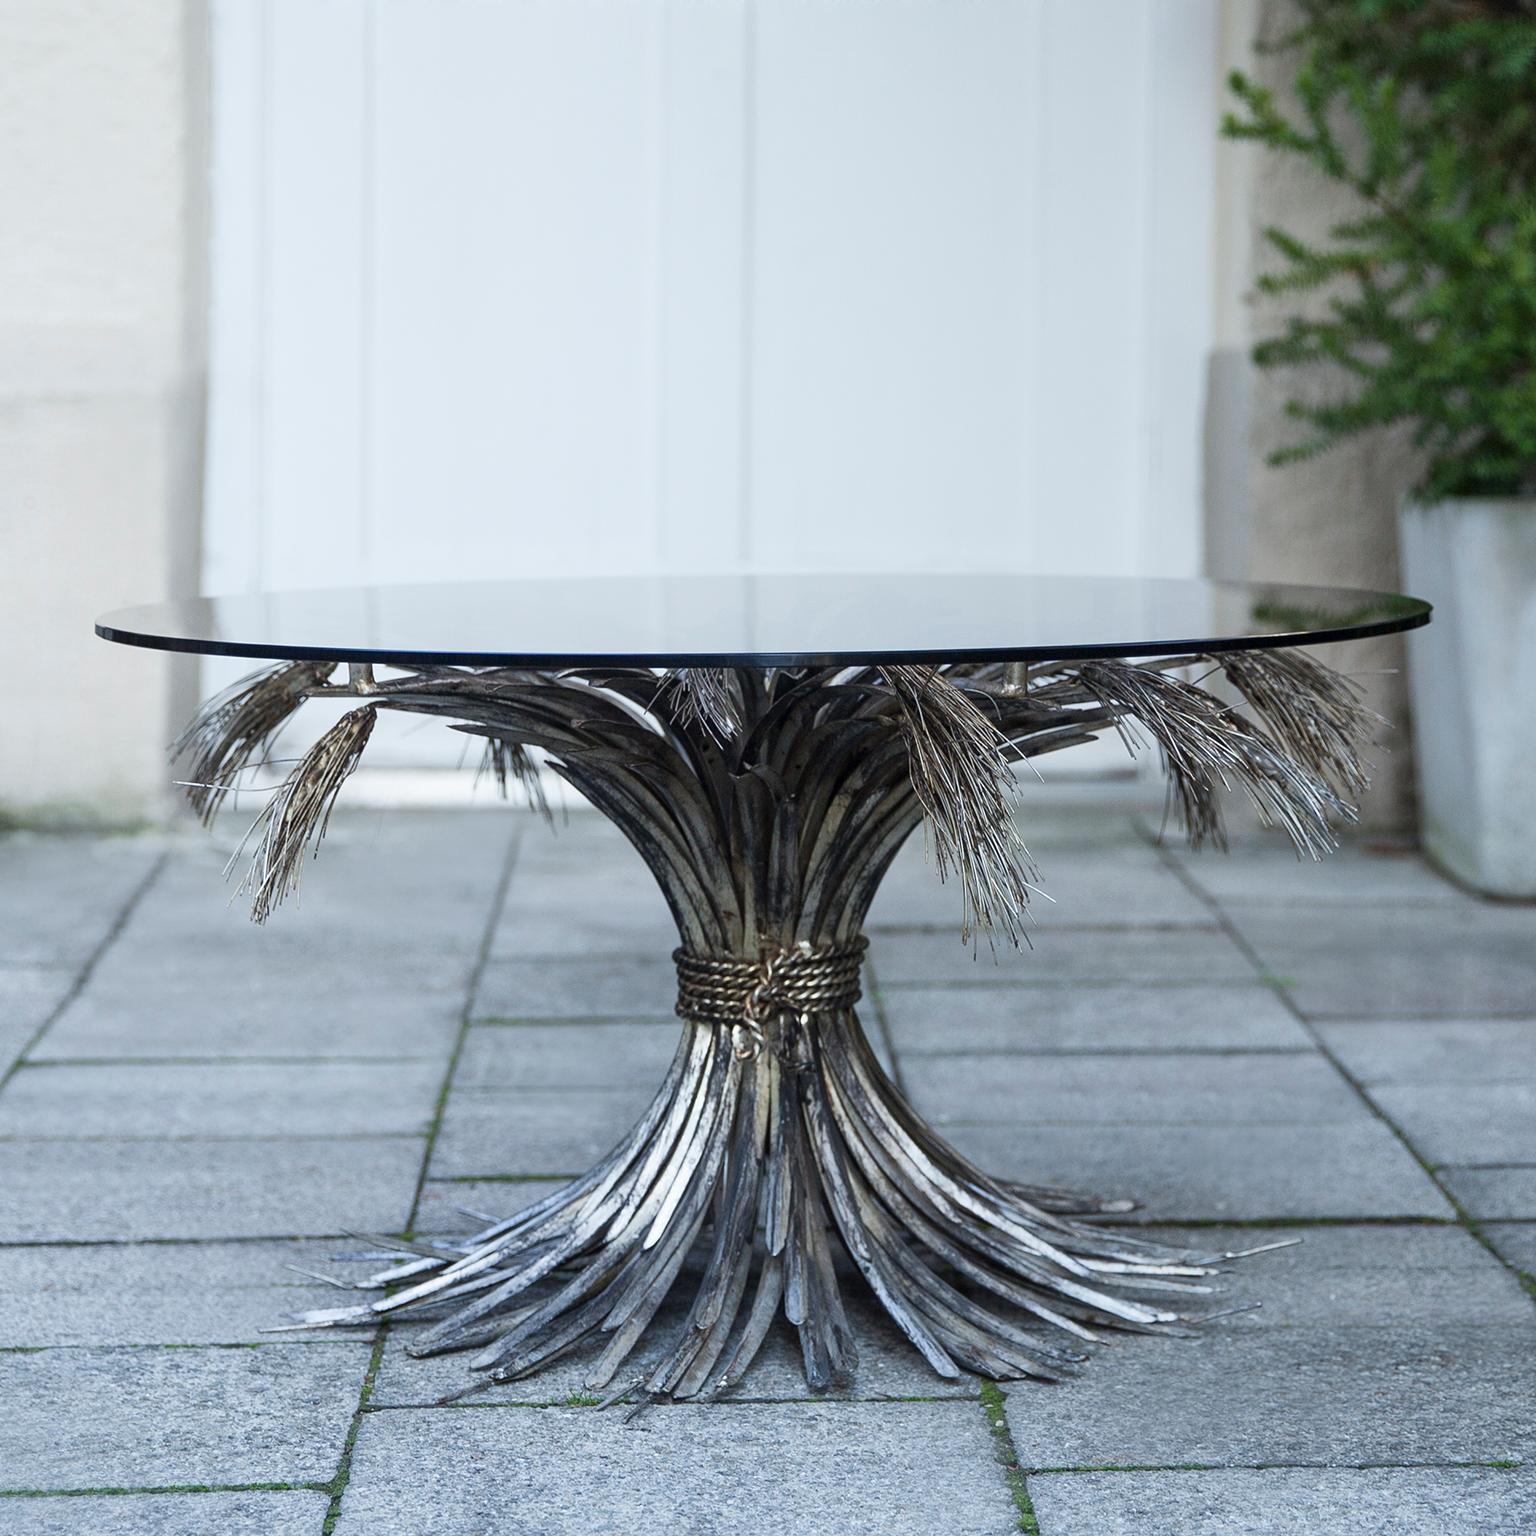 A truly eye-catching original silver-plated gilt metal coffee table. Fashioned in the shape of a wheat sheaf bound by string and a perfect round glass top. This table is a really old piece in original shape with the perfect height to be used as a